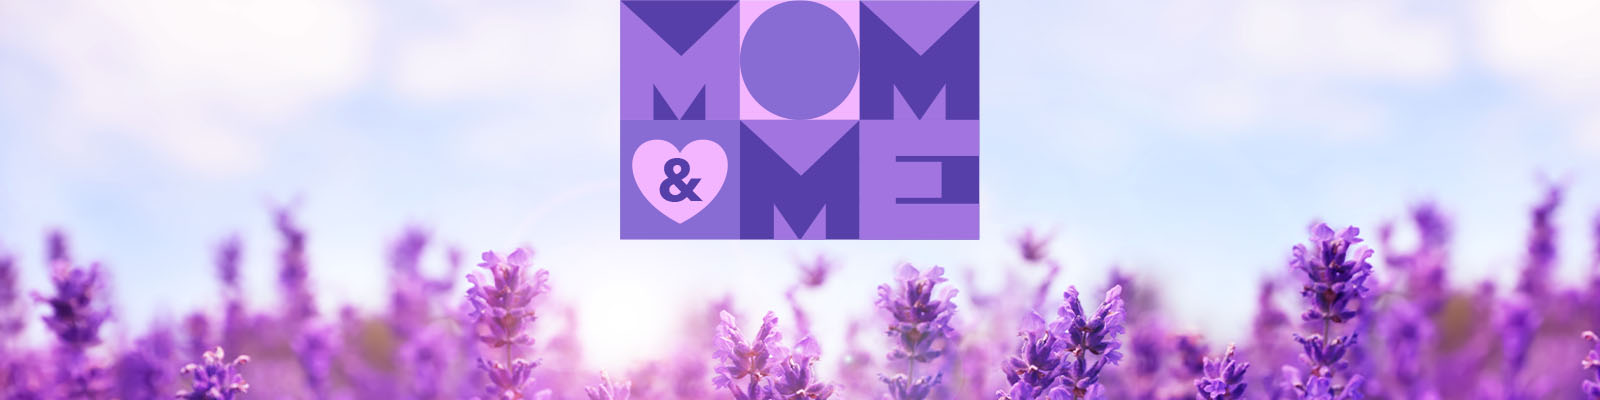 mom and me giveaway banner